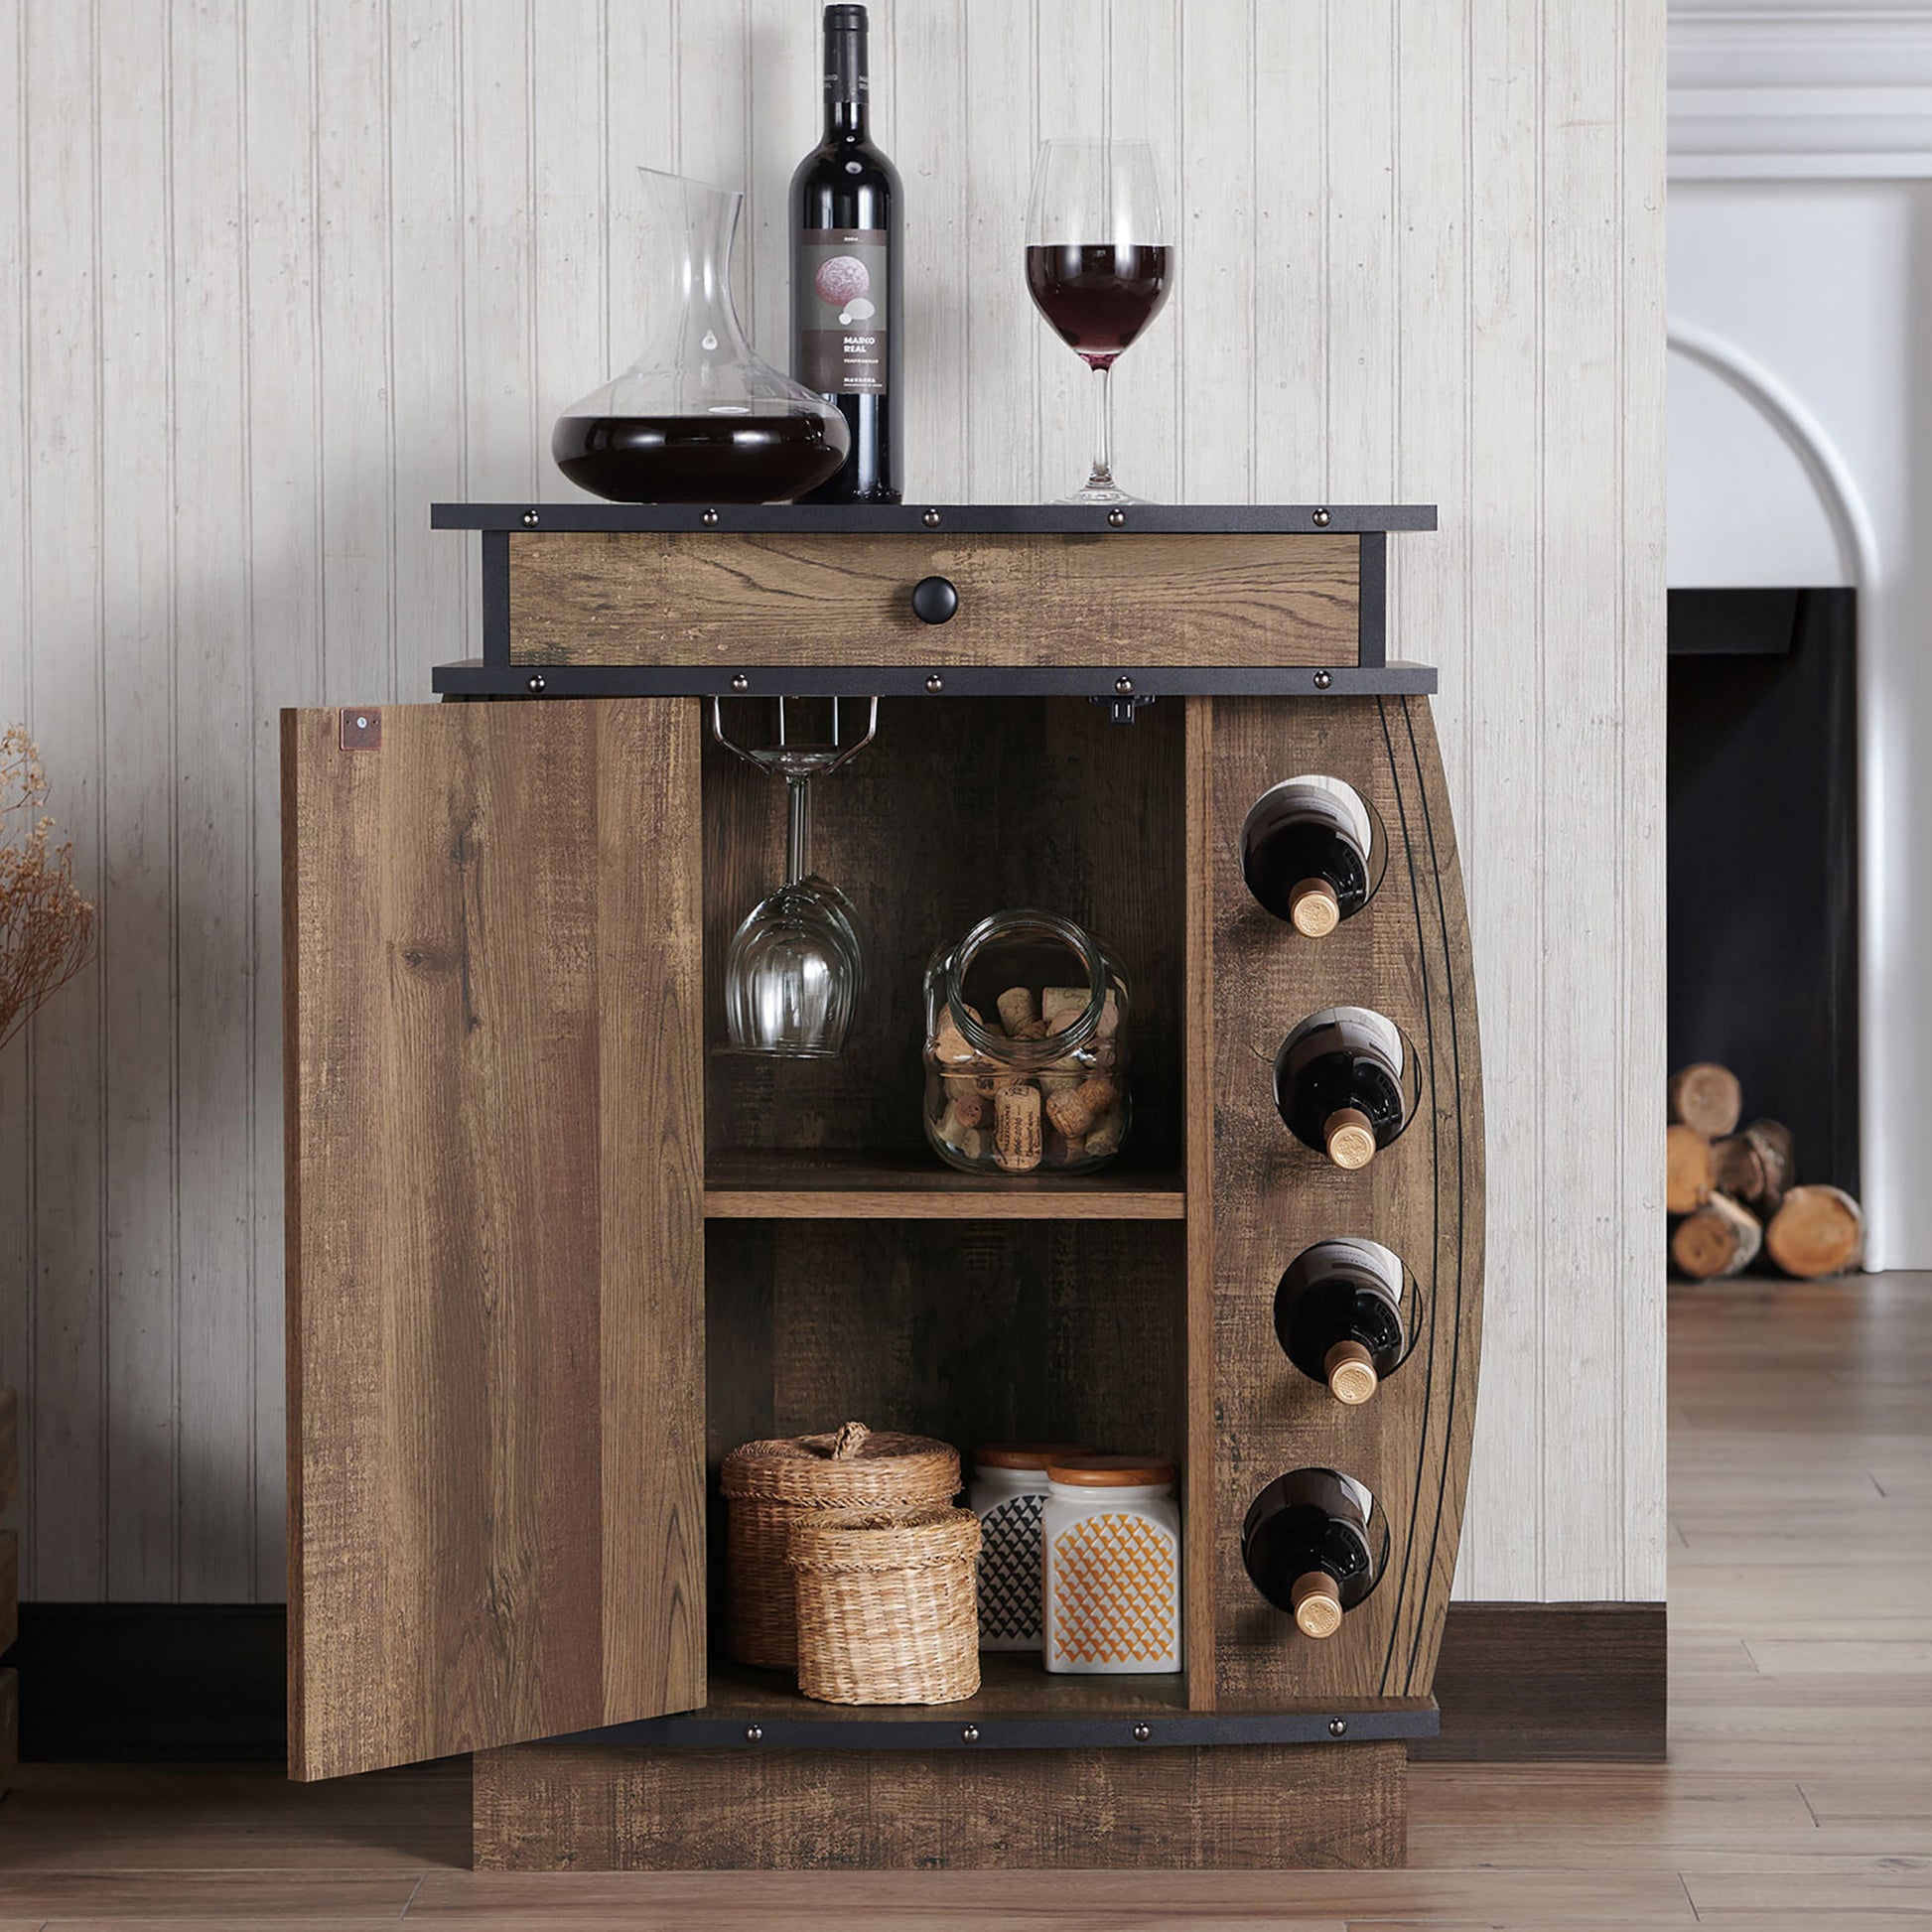 Front-facing rustic reclaimed oak bar cabinet with an eight-bottle wine rack and center door open in a living area with bottles and accessories